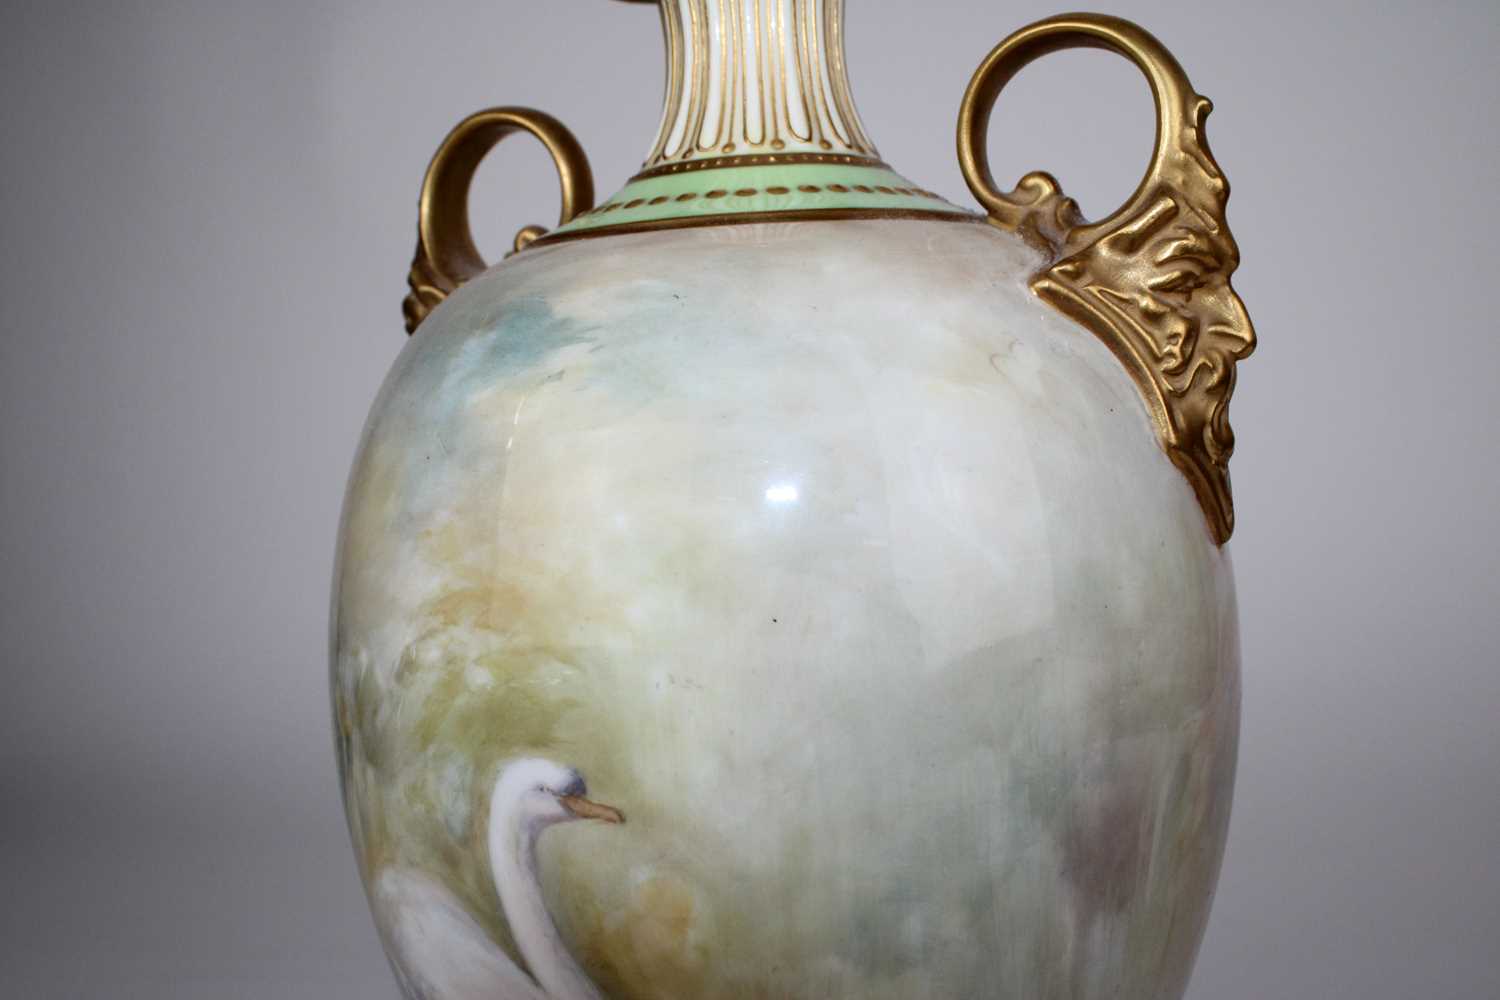 George White for Royal Doulton "Leda and the Swan" Urn - Image 16 of 20